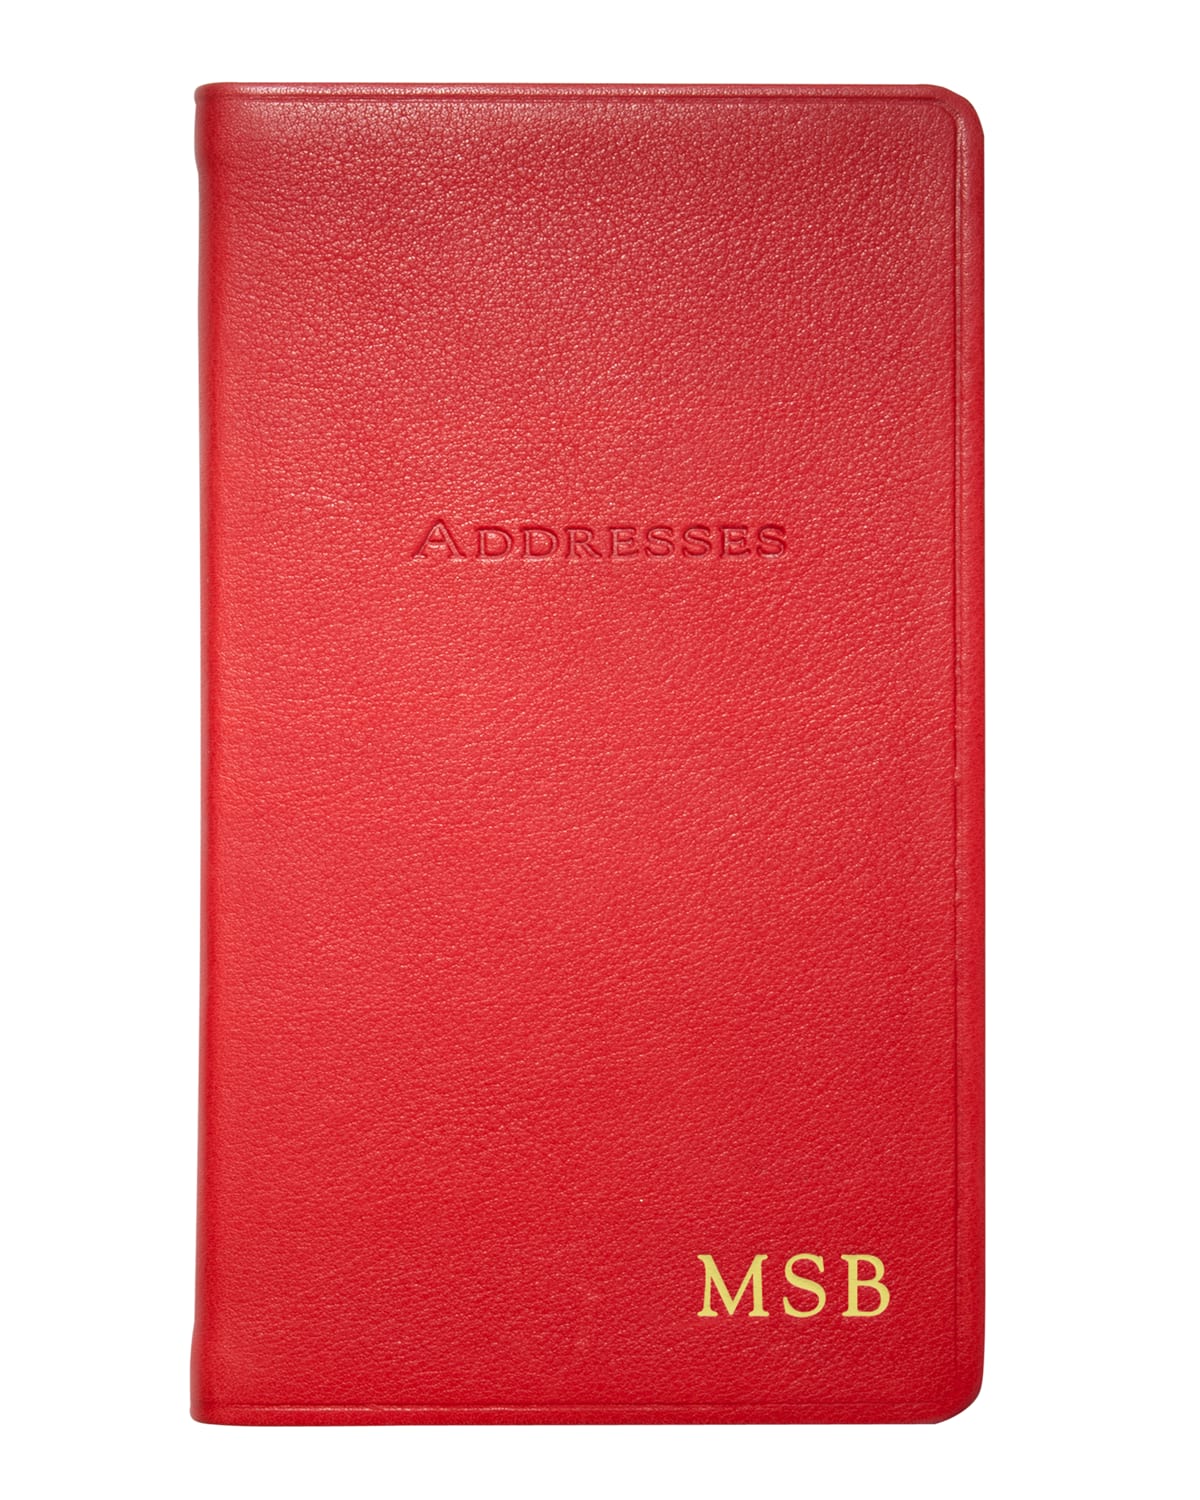 Shop Graphic Image 5" Pocket Address Book In Red